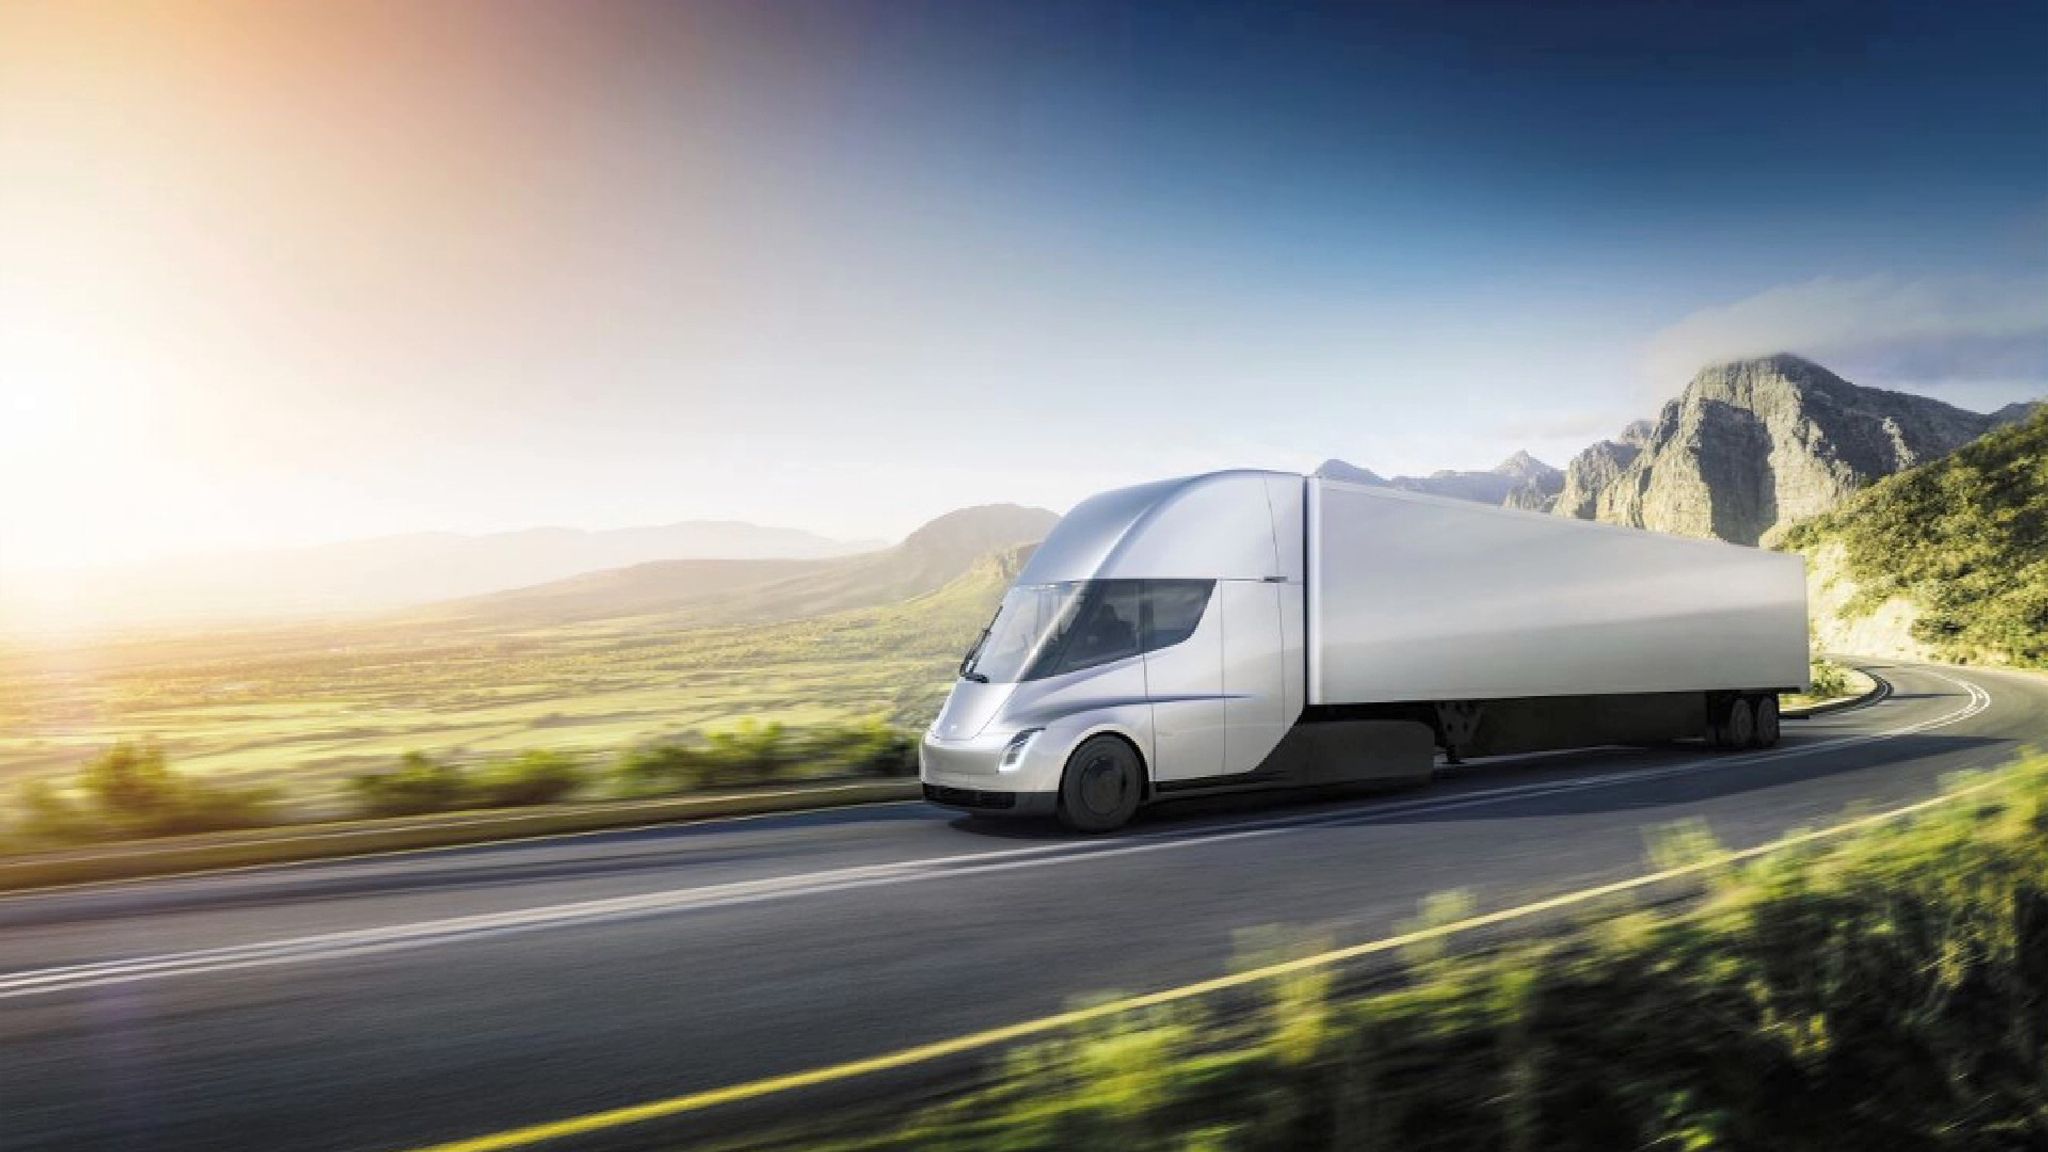 Elon Musk unveils Tesla Semi electric truck in latest effort to move